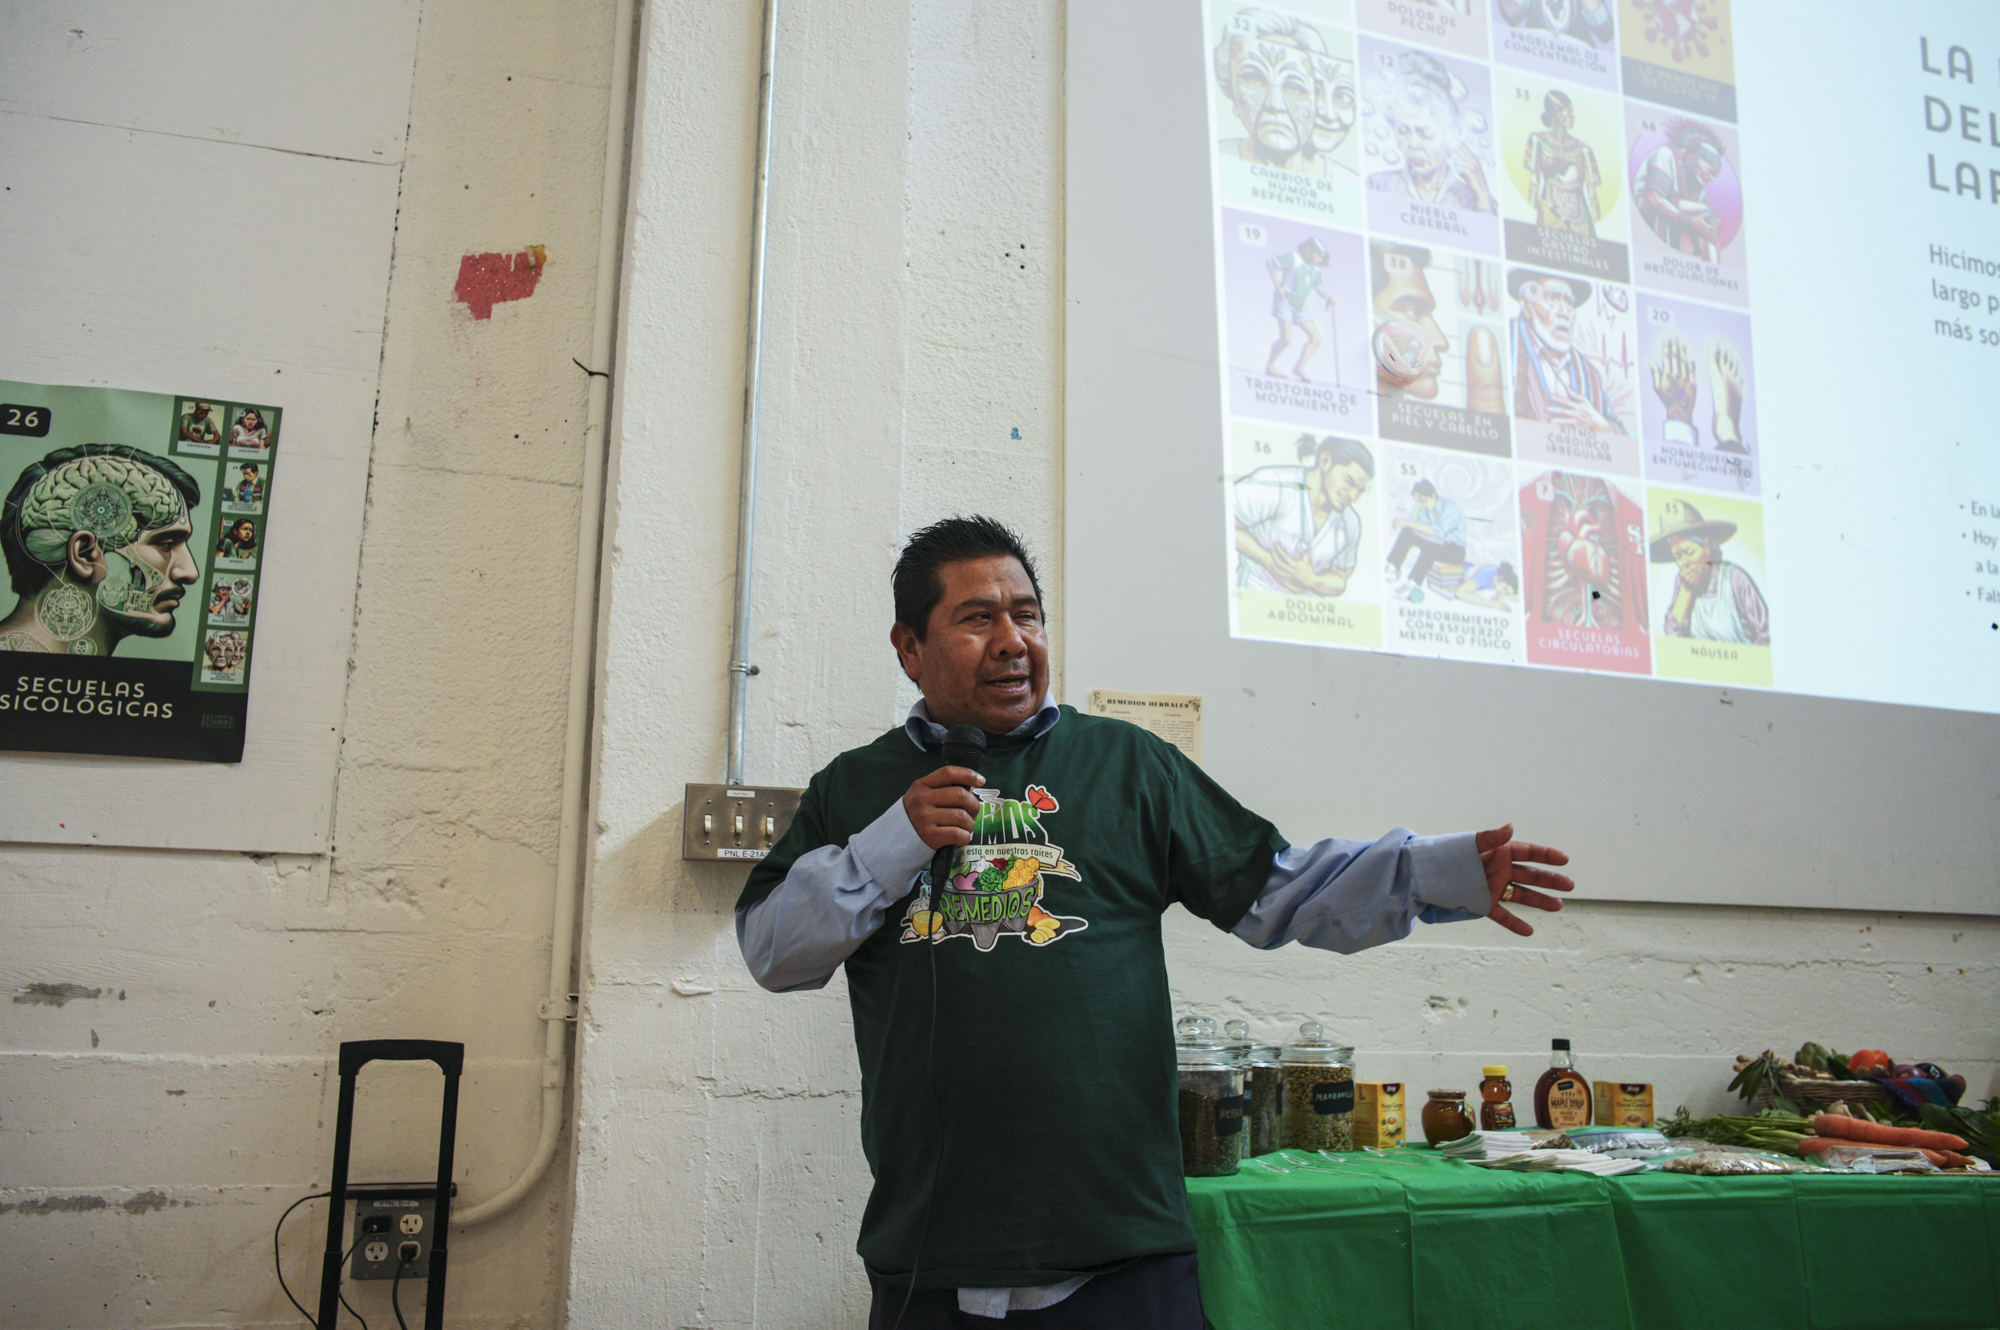 A middle-aged Latino man gestures during a presentation as he talks into a microphone.